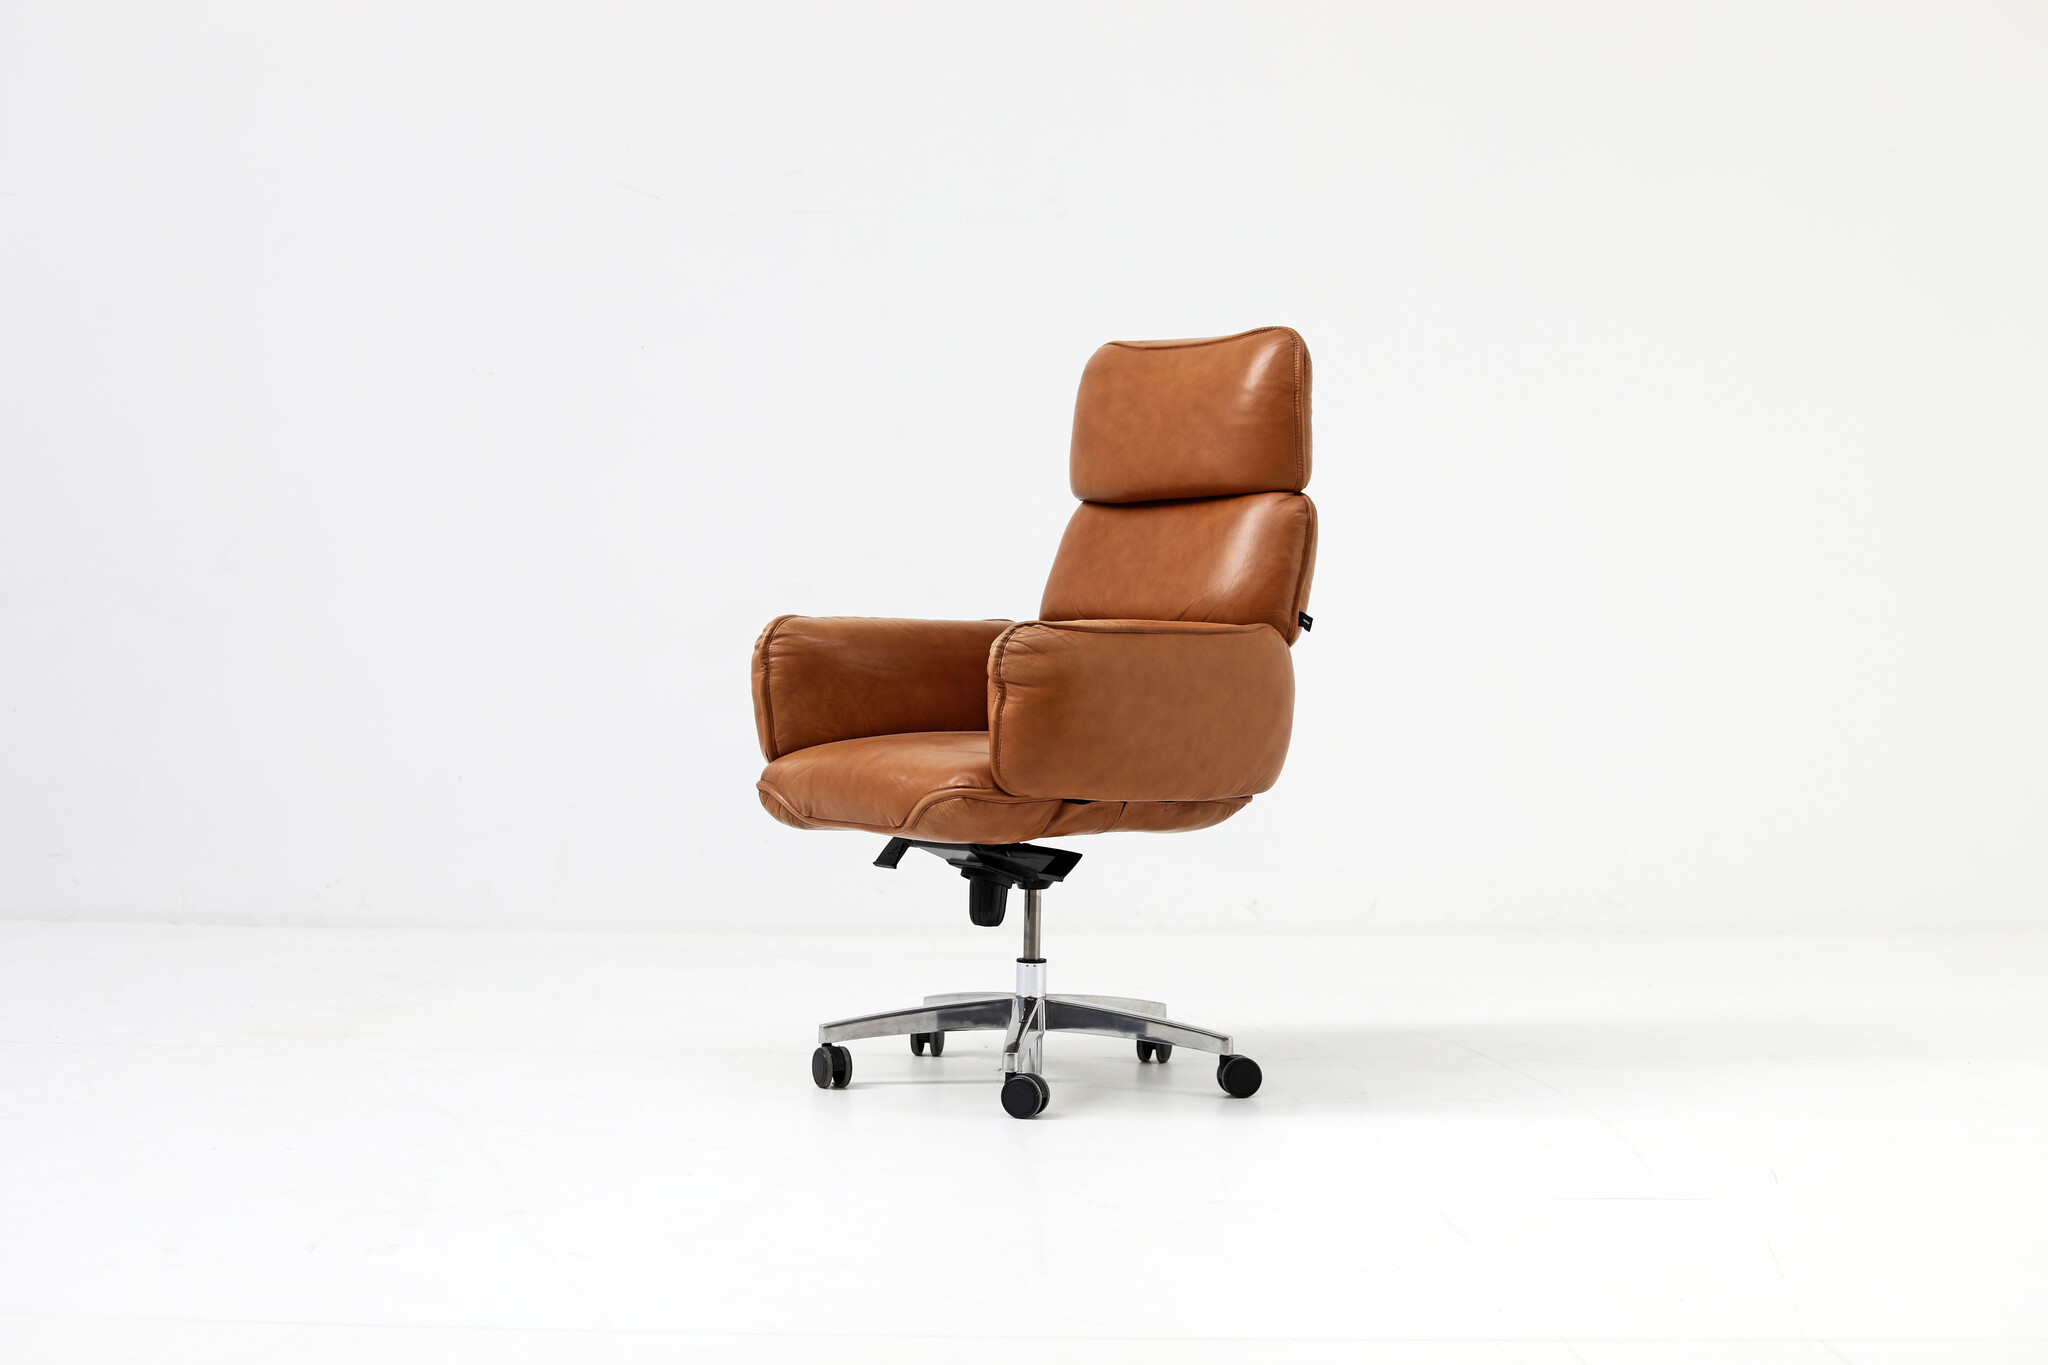 Leather office chair by Otto Zapf for Topstar